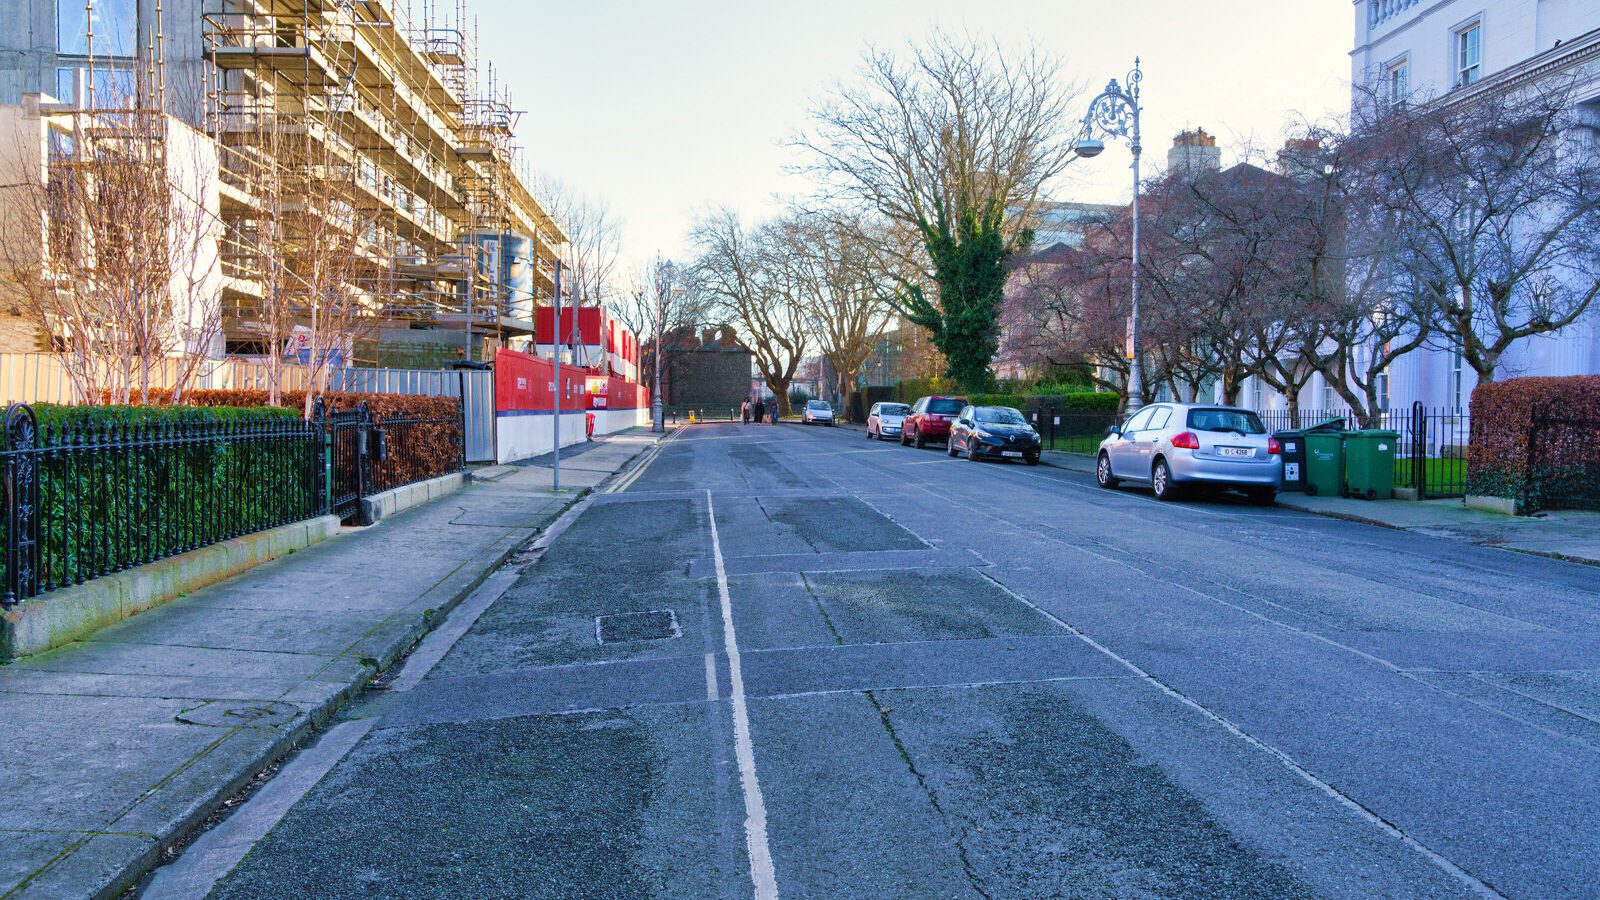 I WAS SURPRISED TO DISCOVER THAT THE GARDA STATION HAS BEEN DEMOLISHED [HARCOURT TERRACE - CHARLEMONT PLACE]-228018-1